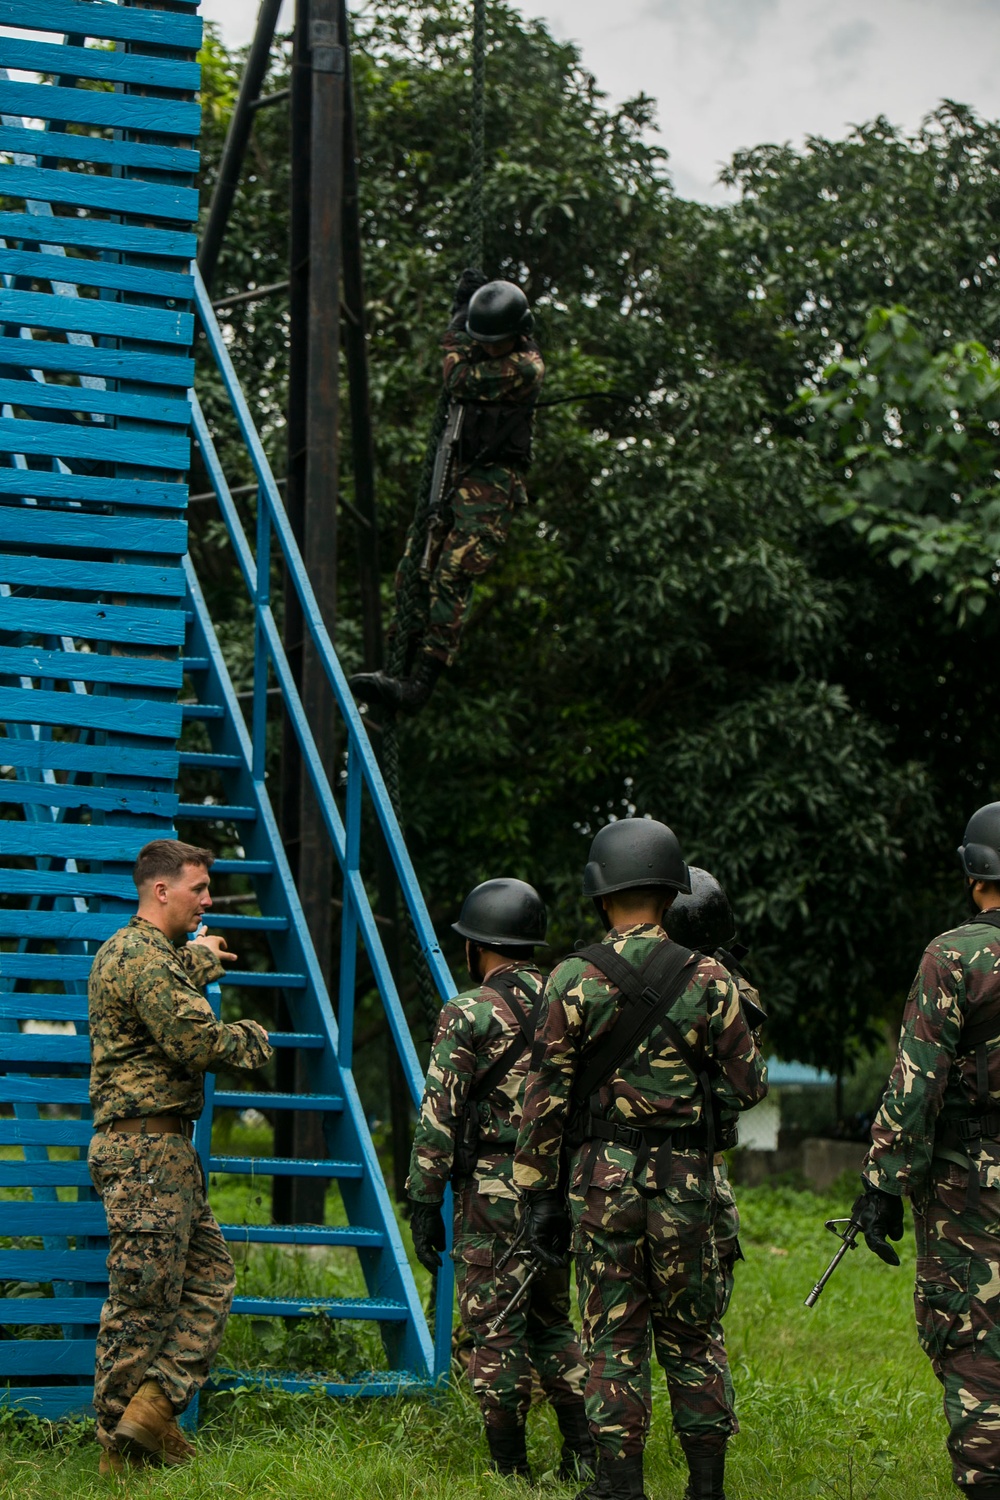 US Marines show Philippine forces ‘the ropes’